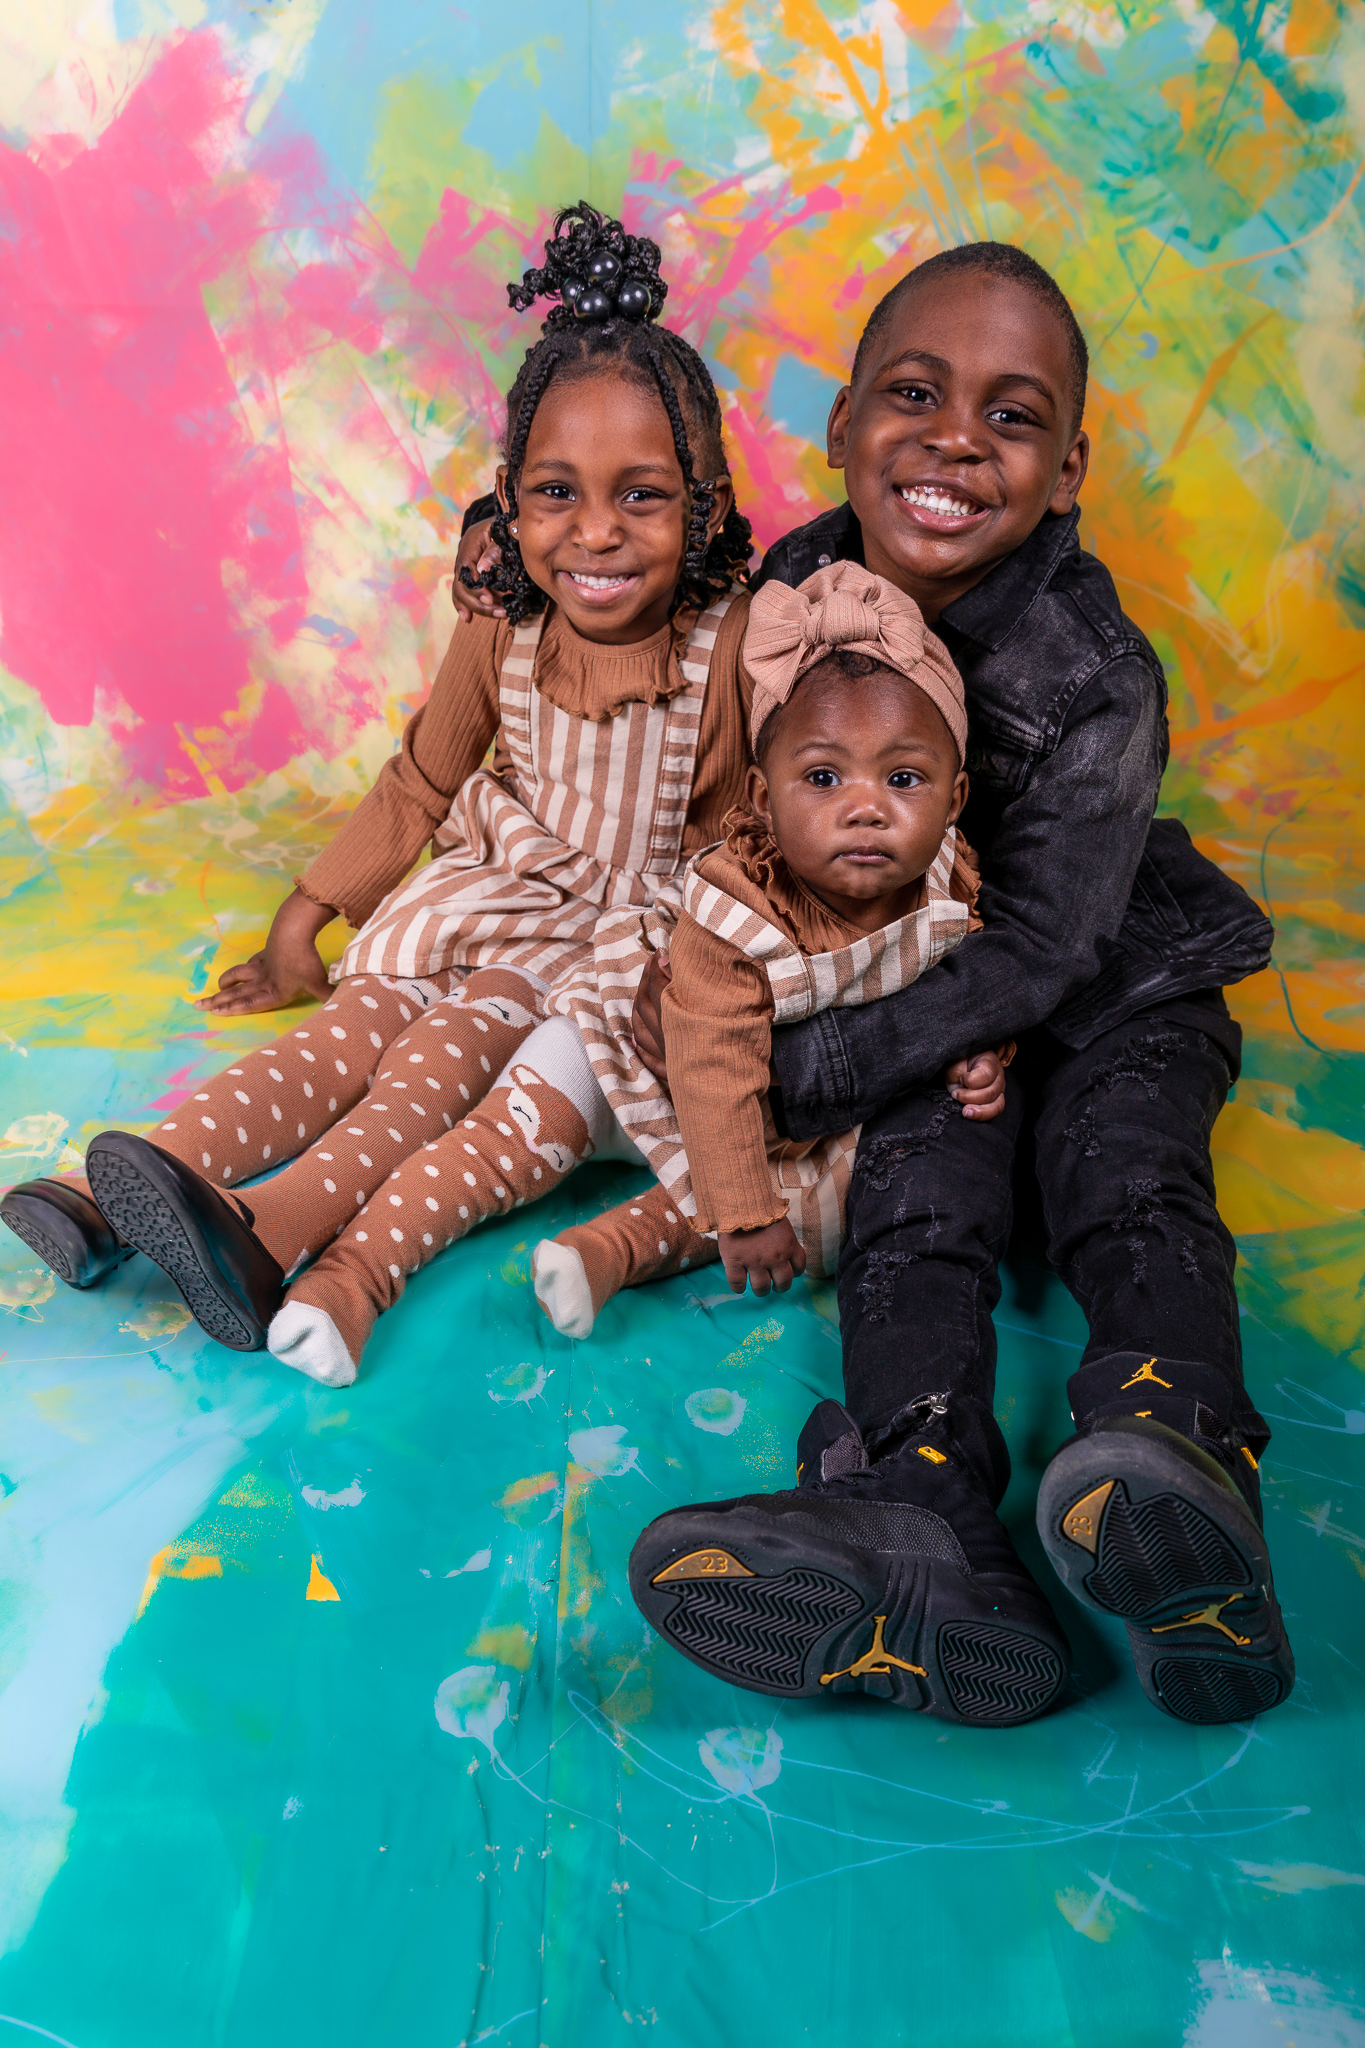 Caputring Moment, Making Memories - free family portraits at Madison Public Library